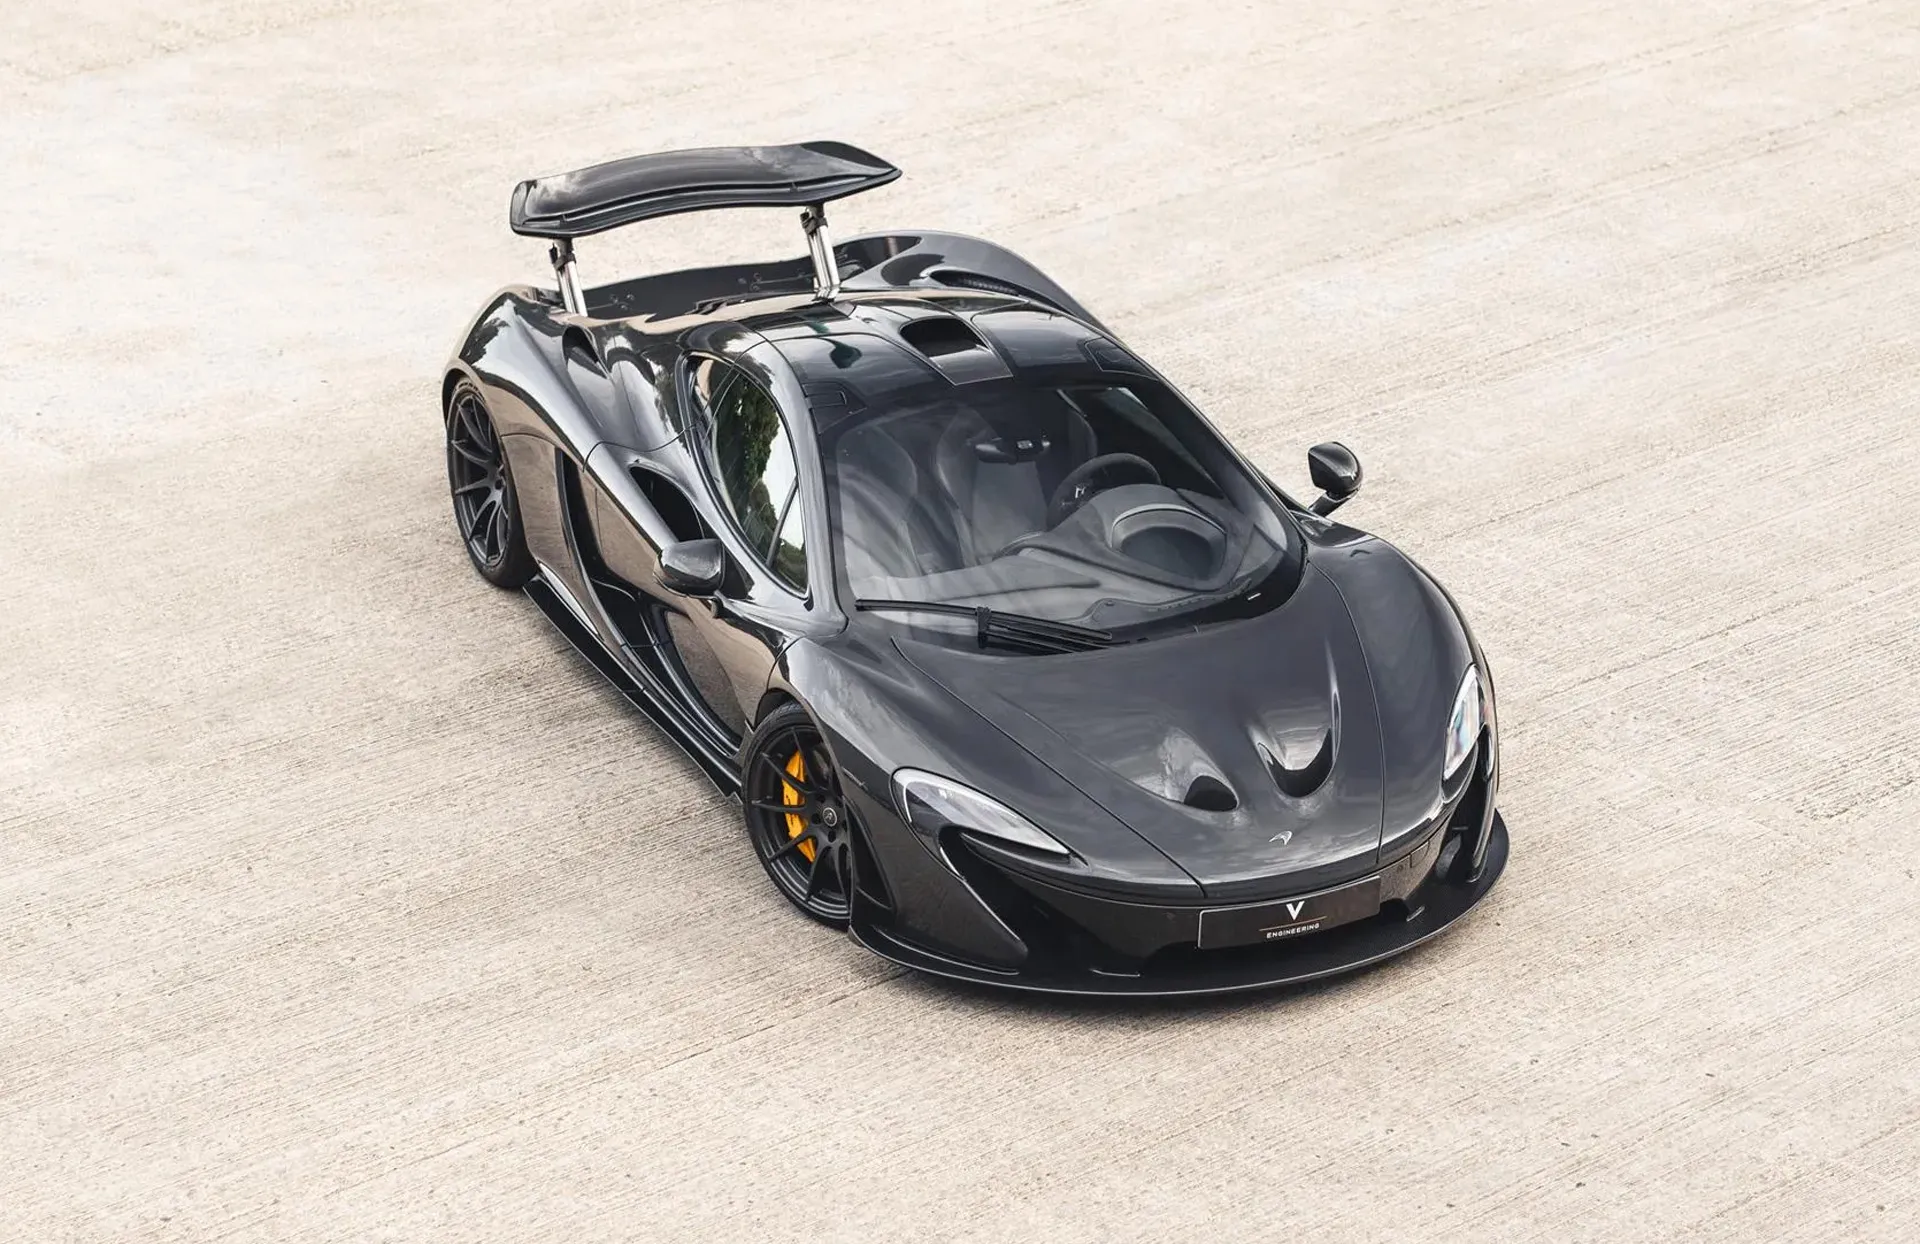 mclaren p1 first owned by jenson button photo credit v management piston heads 100903997 h